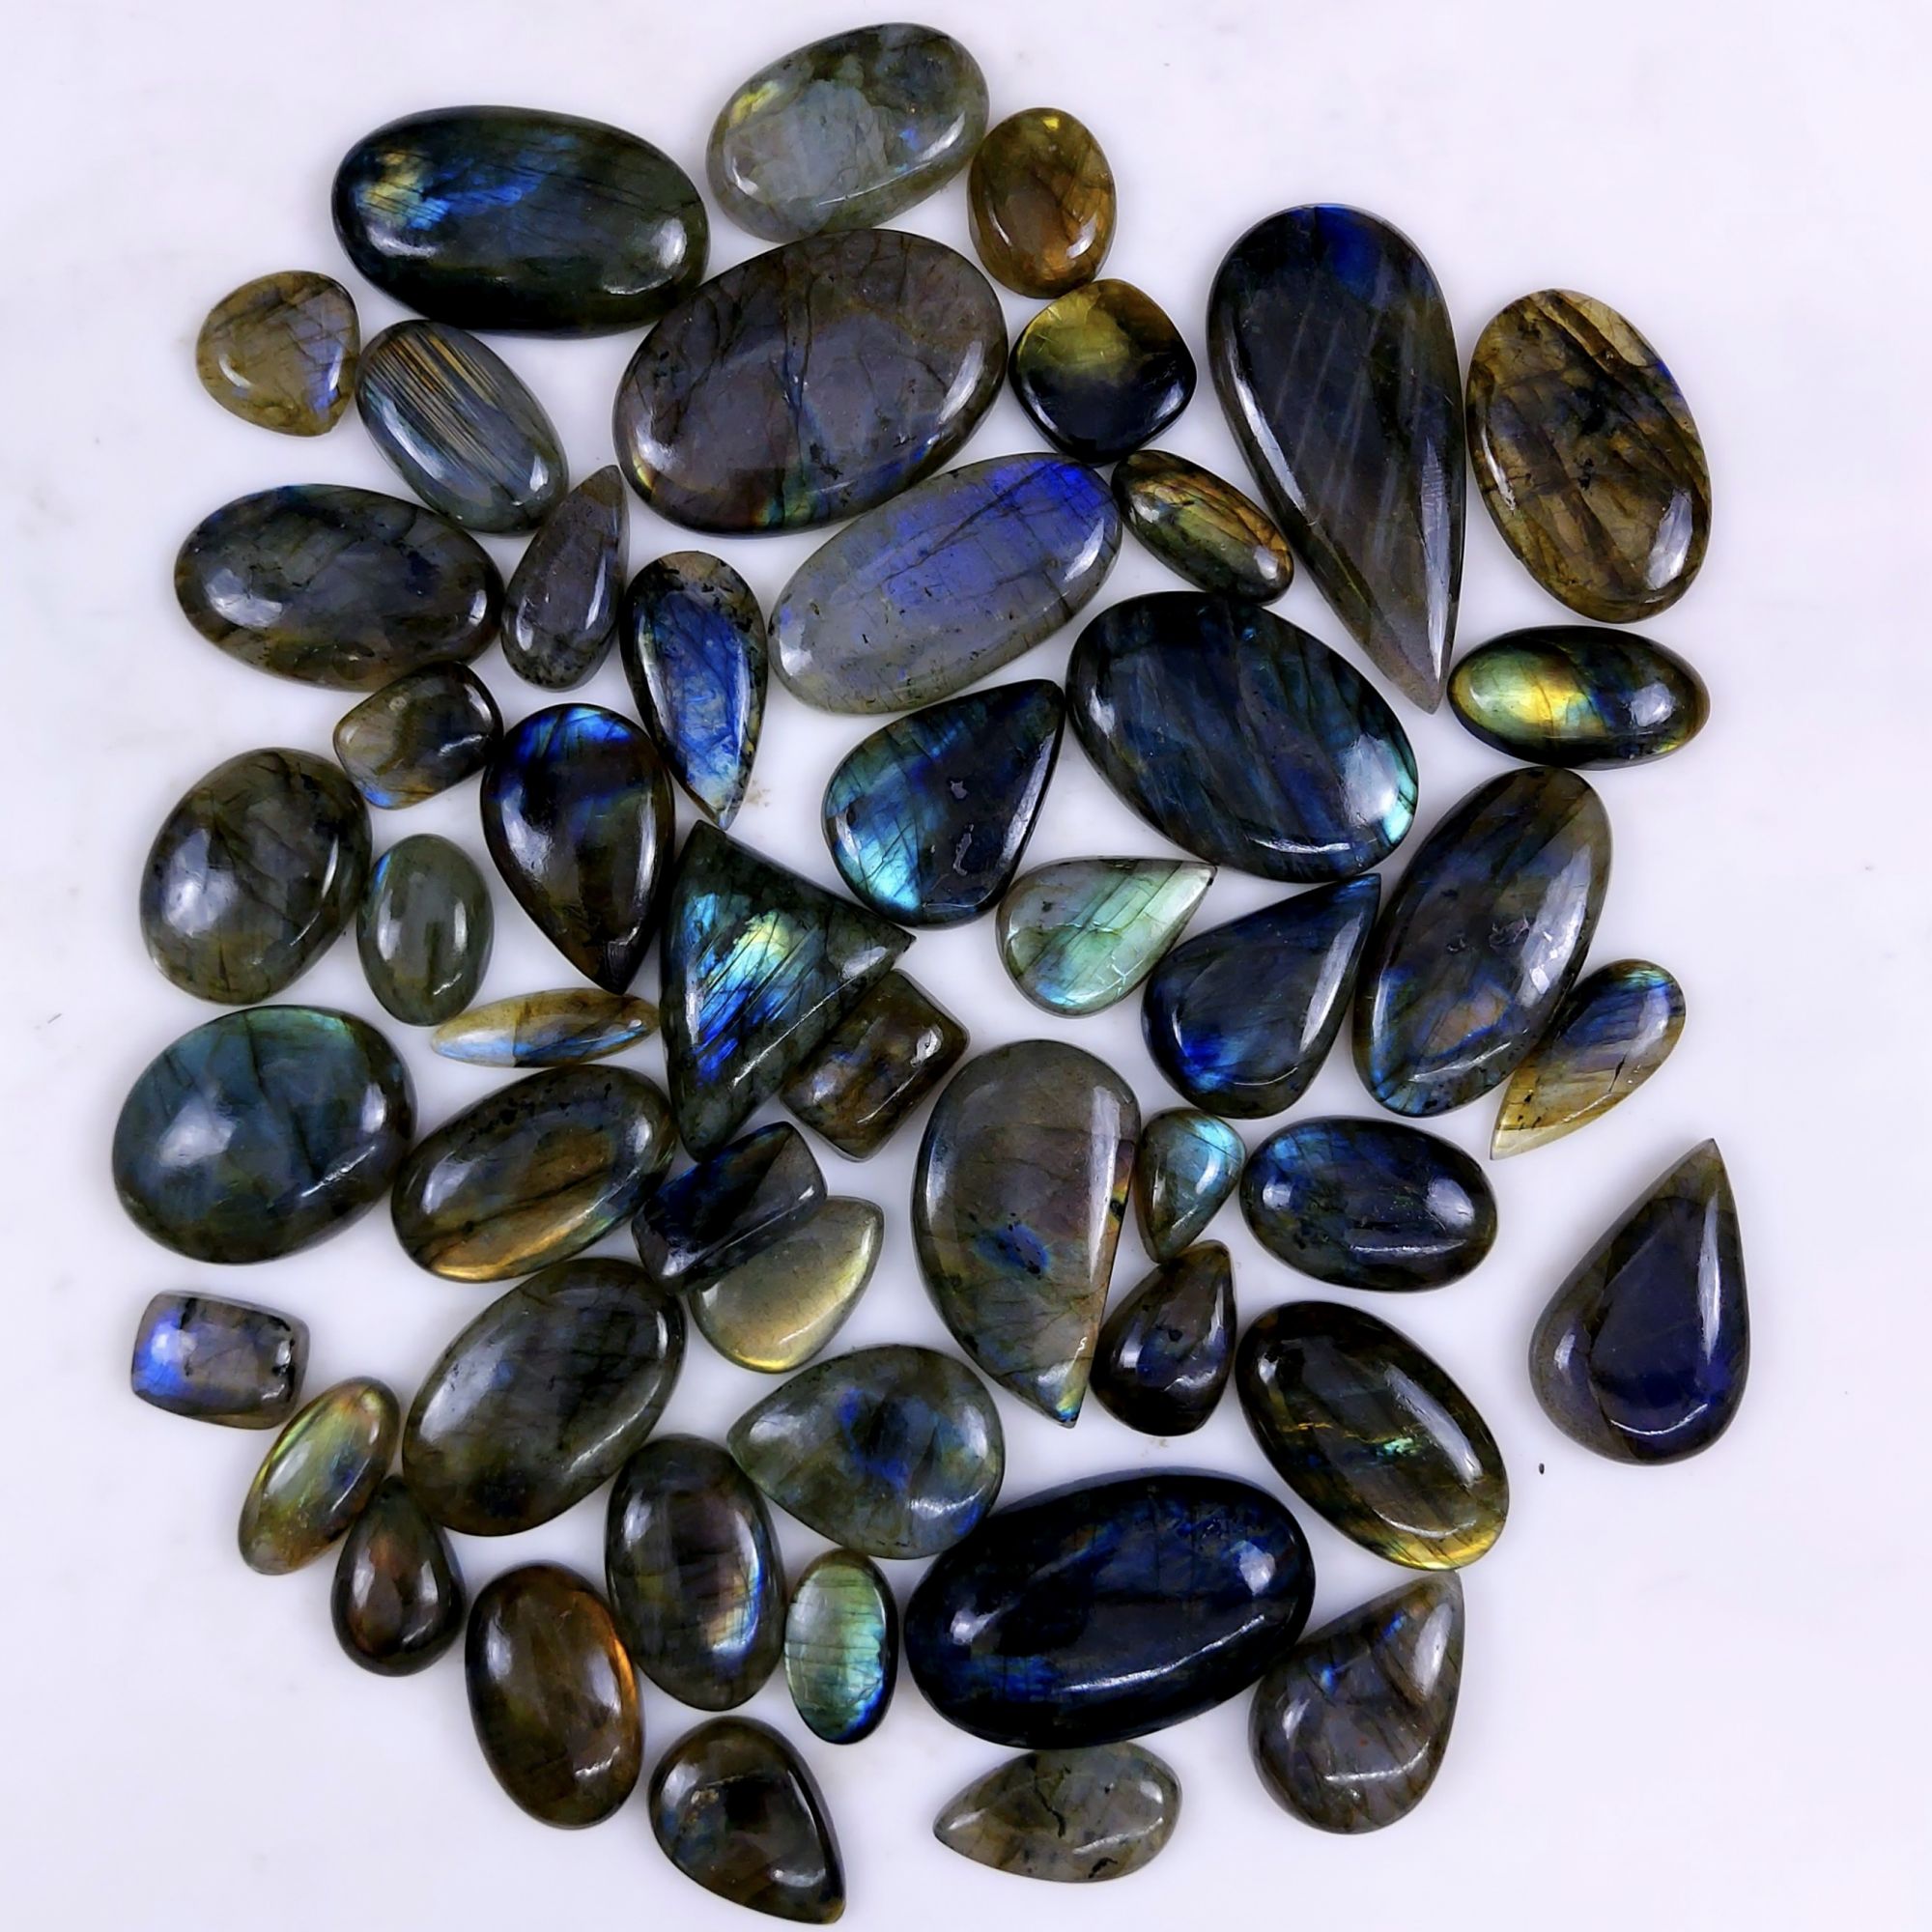 50pc 1551Cts Labradorite Cabochon Multifire Healing Crystal For Jewelry Supplies, Labradorite Necklace Handmade Wire Wrapped Gemstone Pendant 44x27 18x16mm#6392